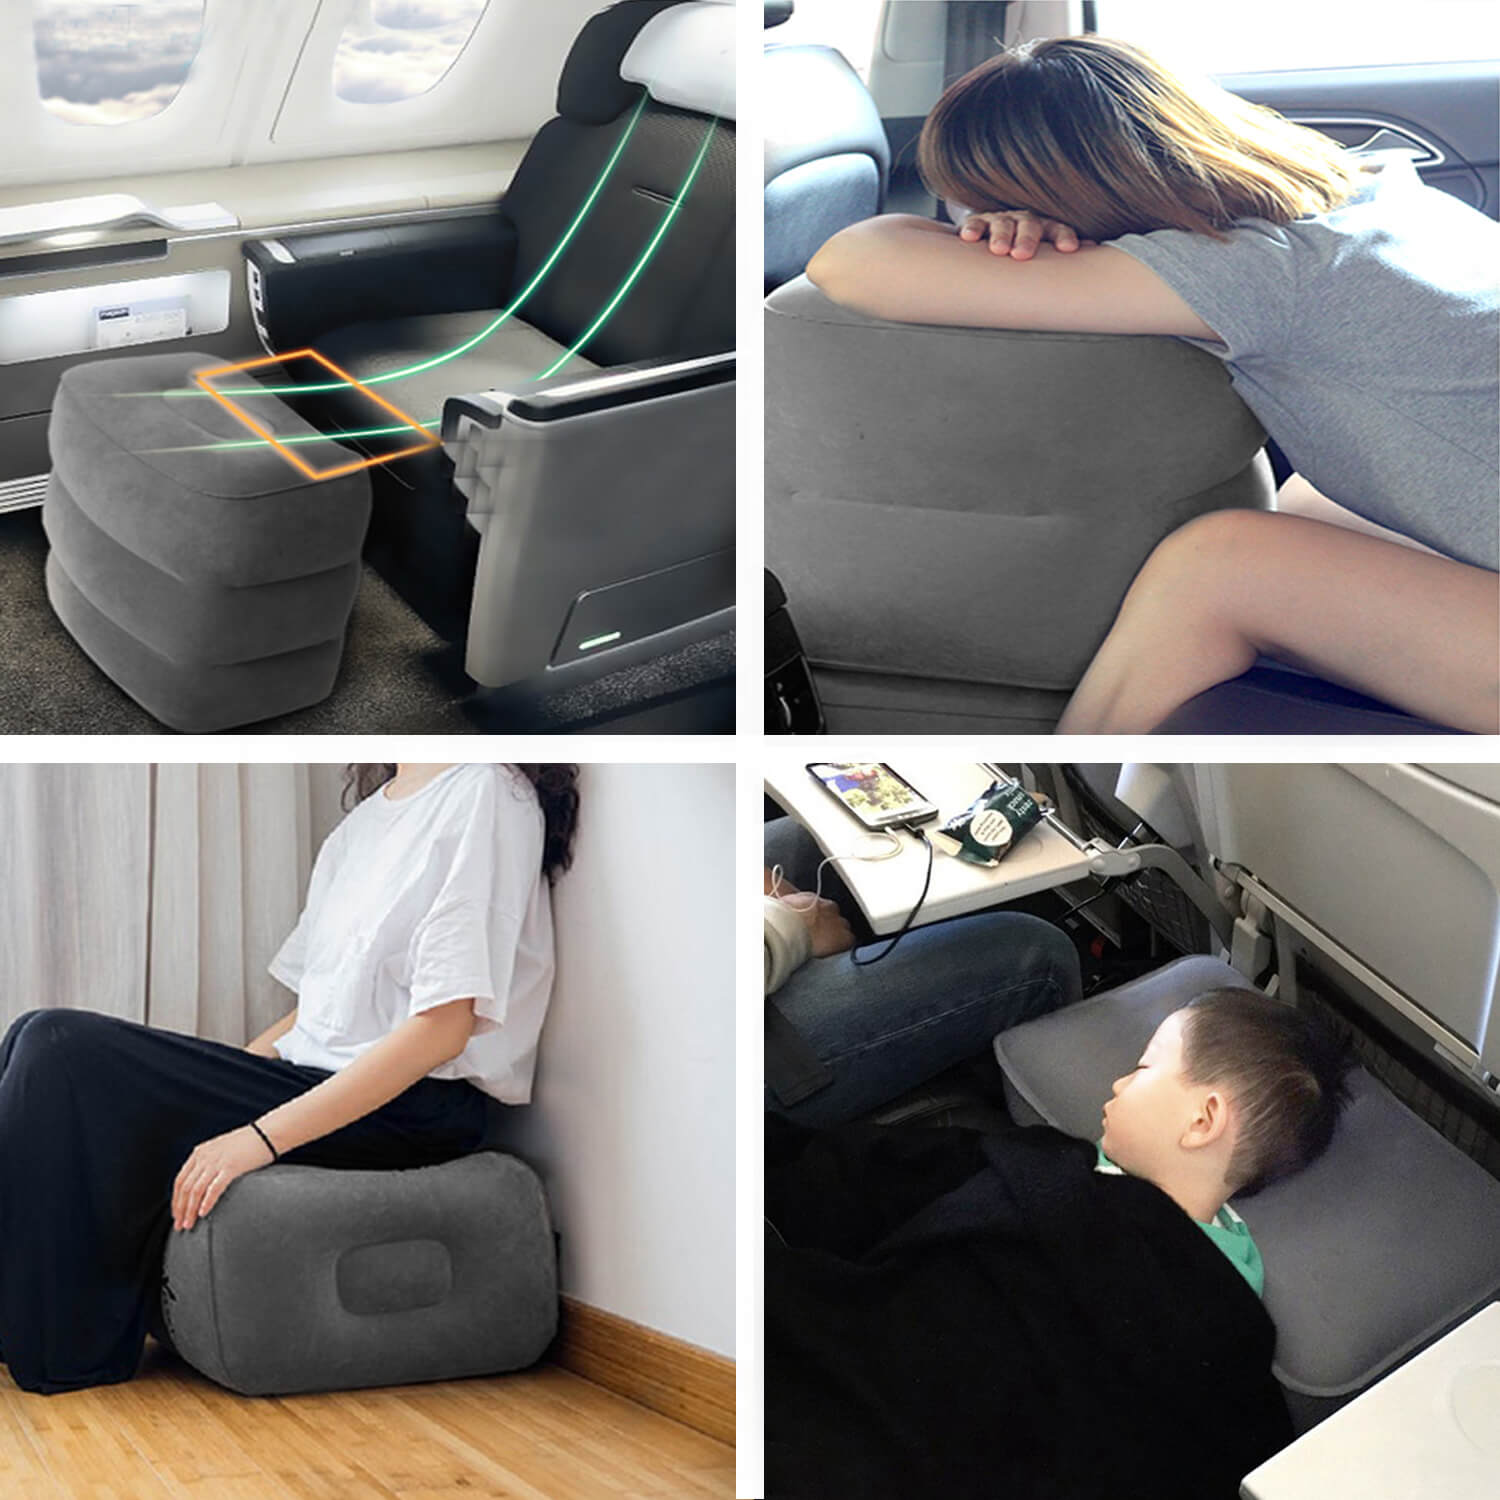 Blue 3 Air Valves 3 Levels Adjustable Height Travel Leg Rest Pillow for Airplane Inflatable Kids & Adults Footrest Pillow with Pump Travel Bread Travel Foot Rest Pillow Home GONGZI01 Car Train Office